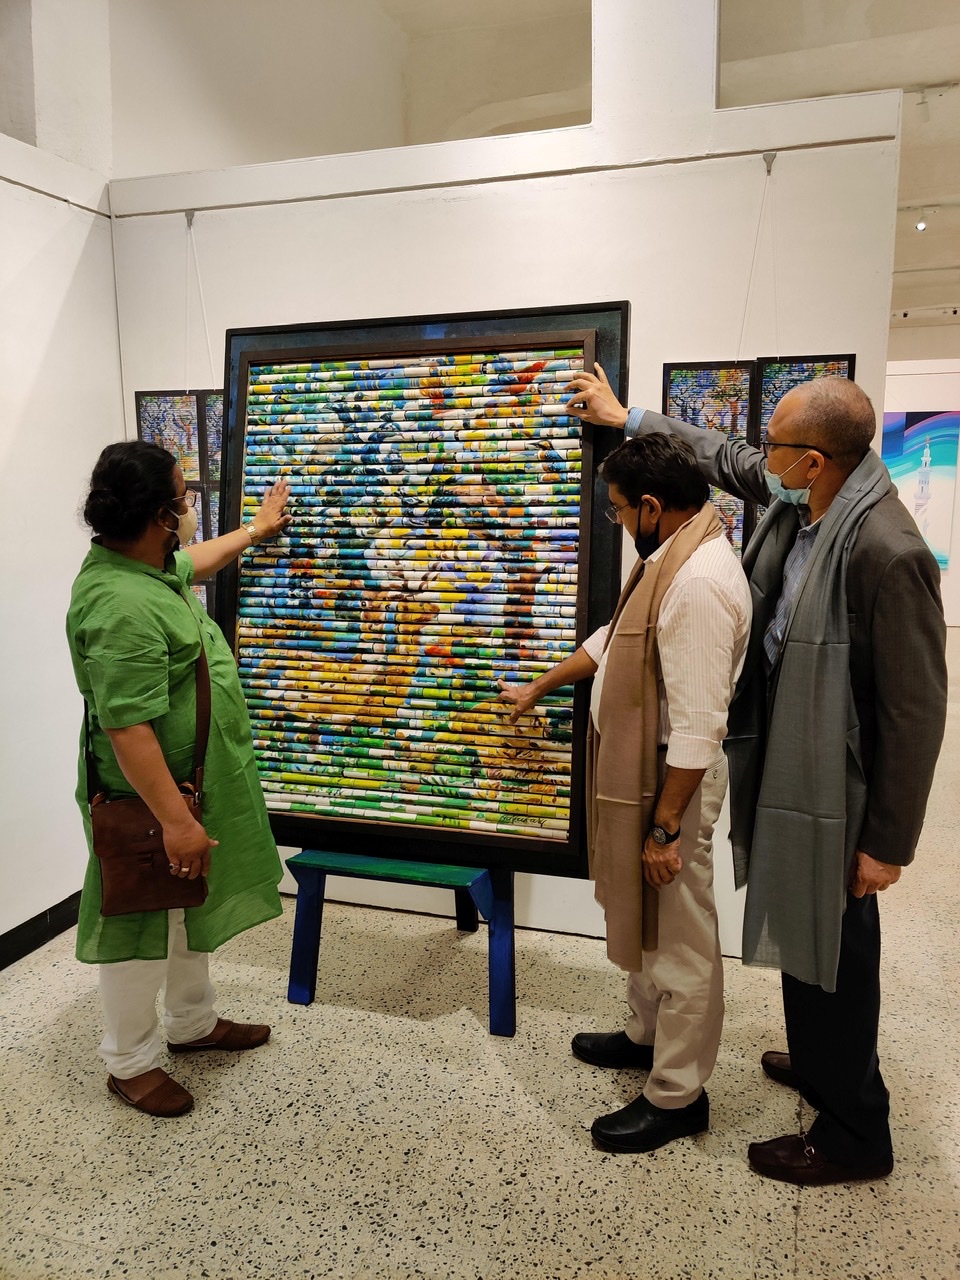 Jehangir Art Gallery opens with celebrated artist Bibhuti Adhikary's show, art installation ‘The Rolling Painting’, made with 594 PVC Pipes biggest attraction for Mumbaikars